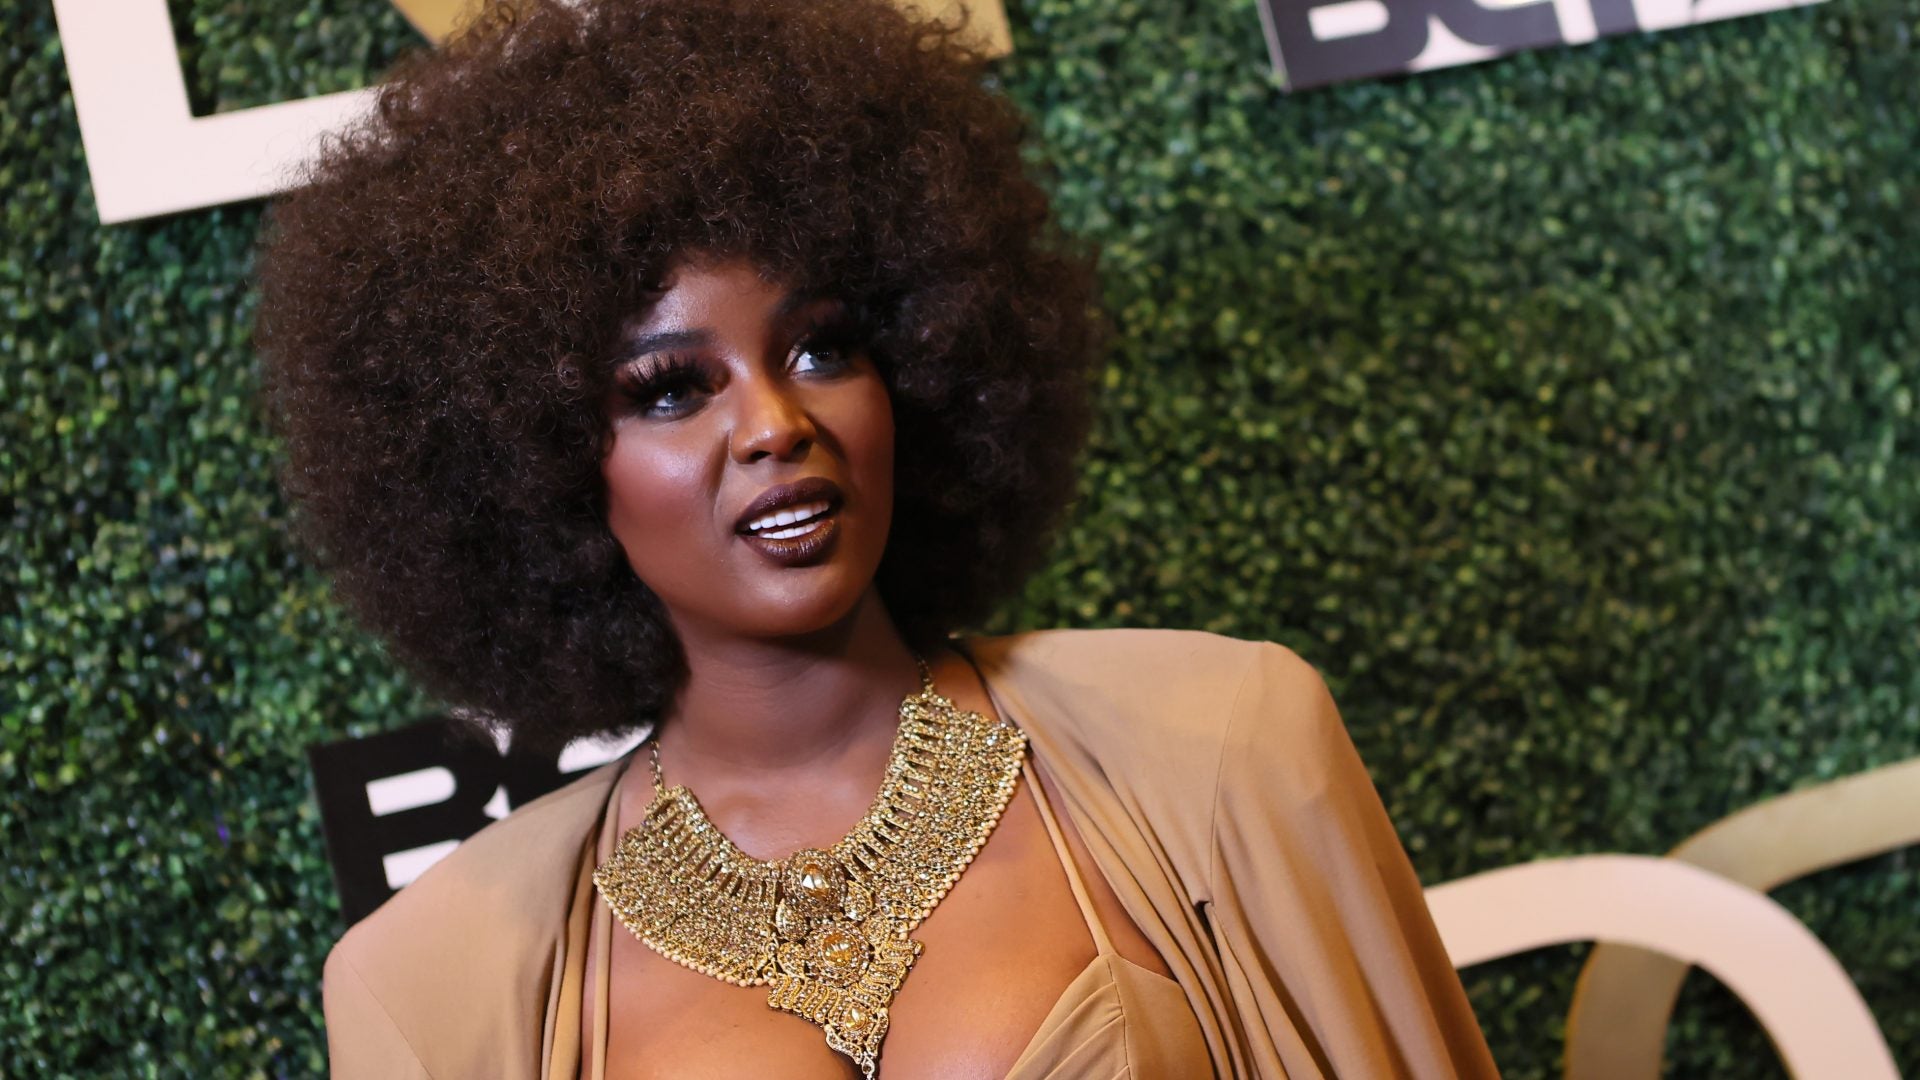 Amara La Negra Has Lost 35 Pounds But Her Confidence Hasn't Changed